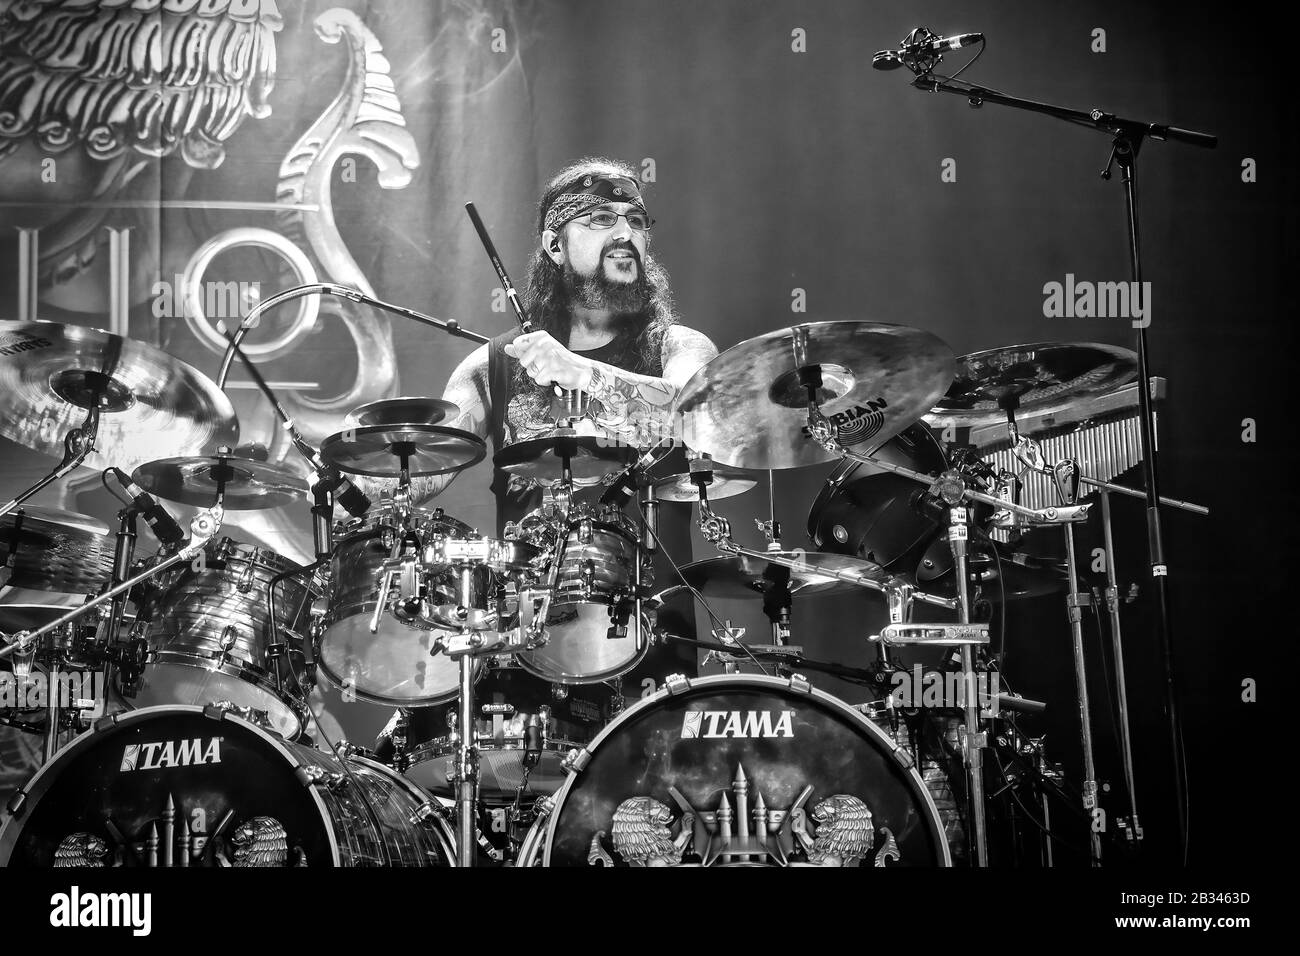 Drammen, Norway. 02nd, March 2020. The Amerian hard rock band Sons of Apollo performs a live concert at Union Scene in Drammen. Here drummer Mike Portnoy is seen live on stage. (Photo credit: Gonzales Photo - Terje Dokken). Stock Photo